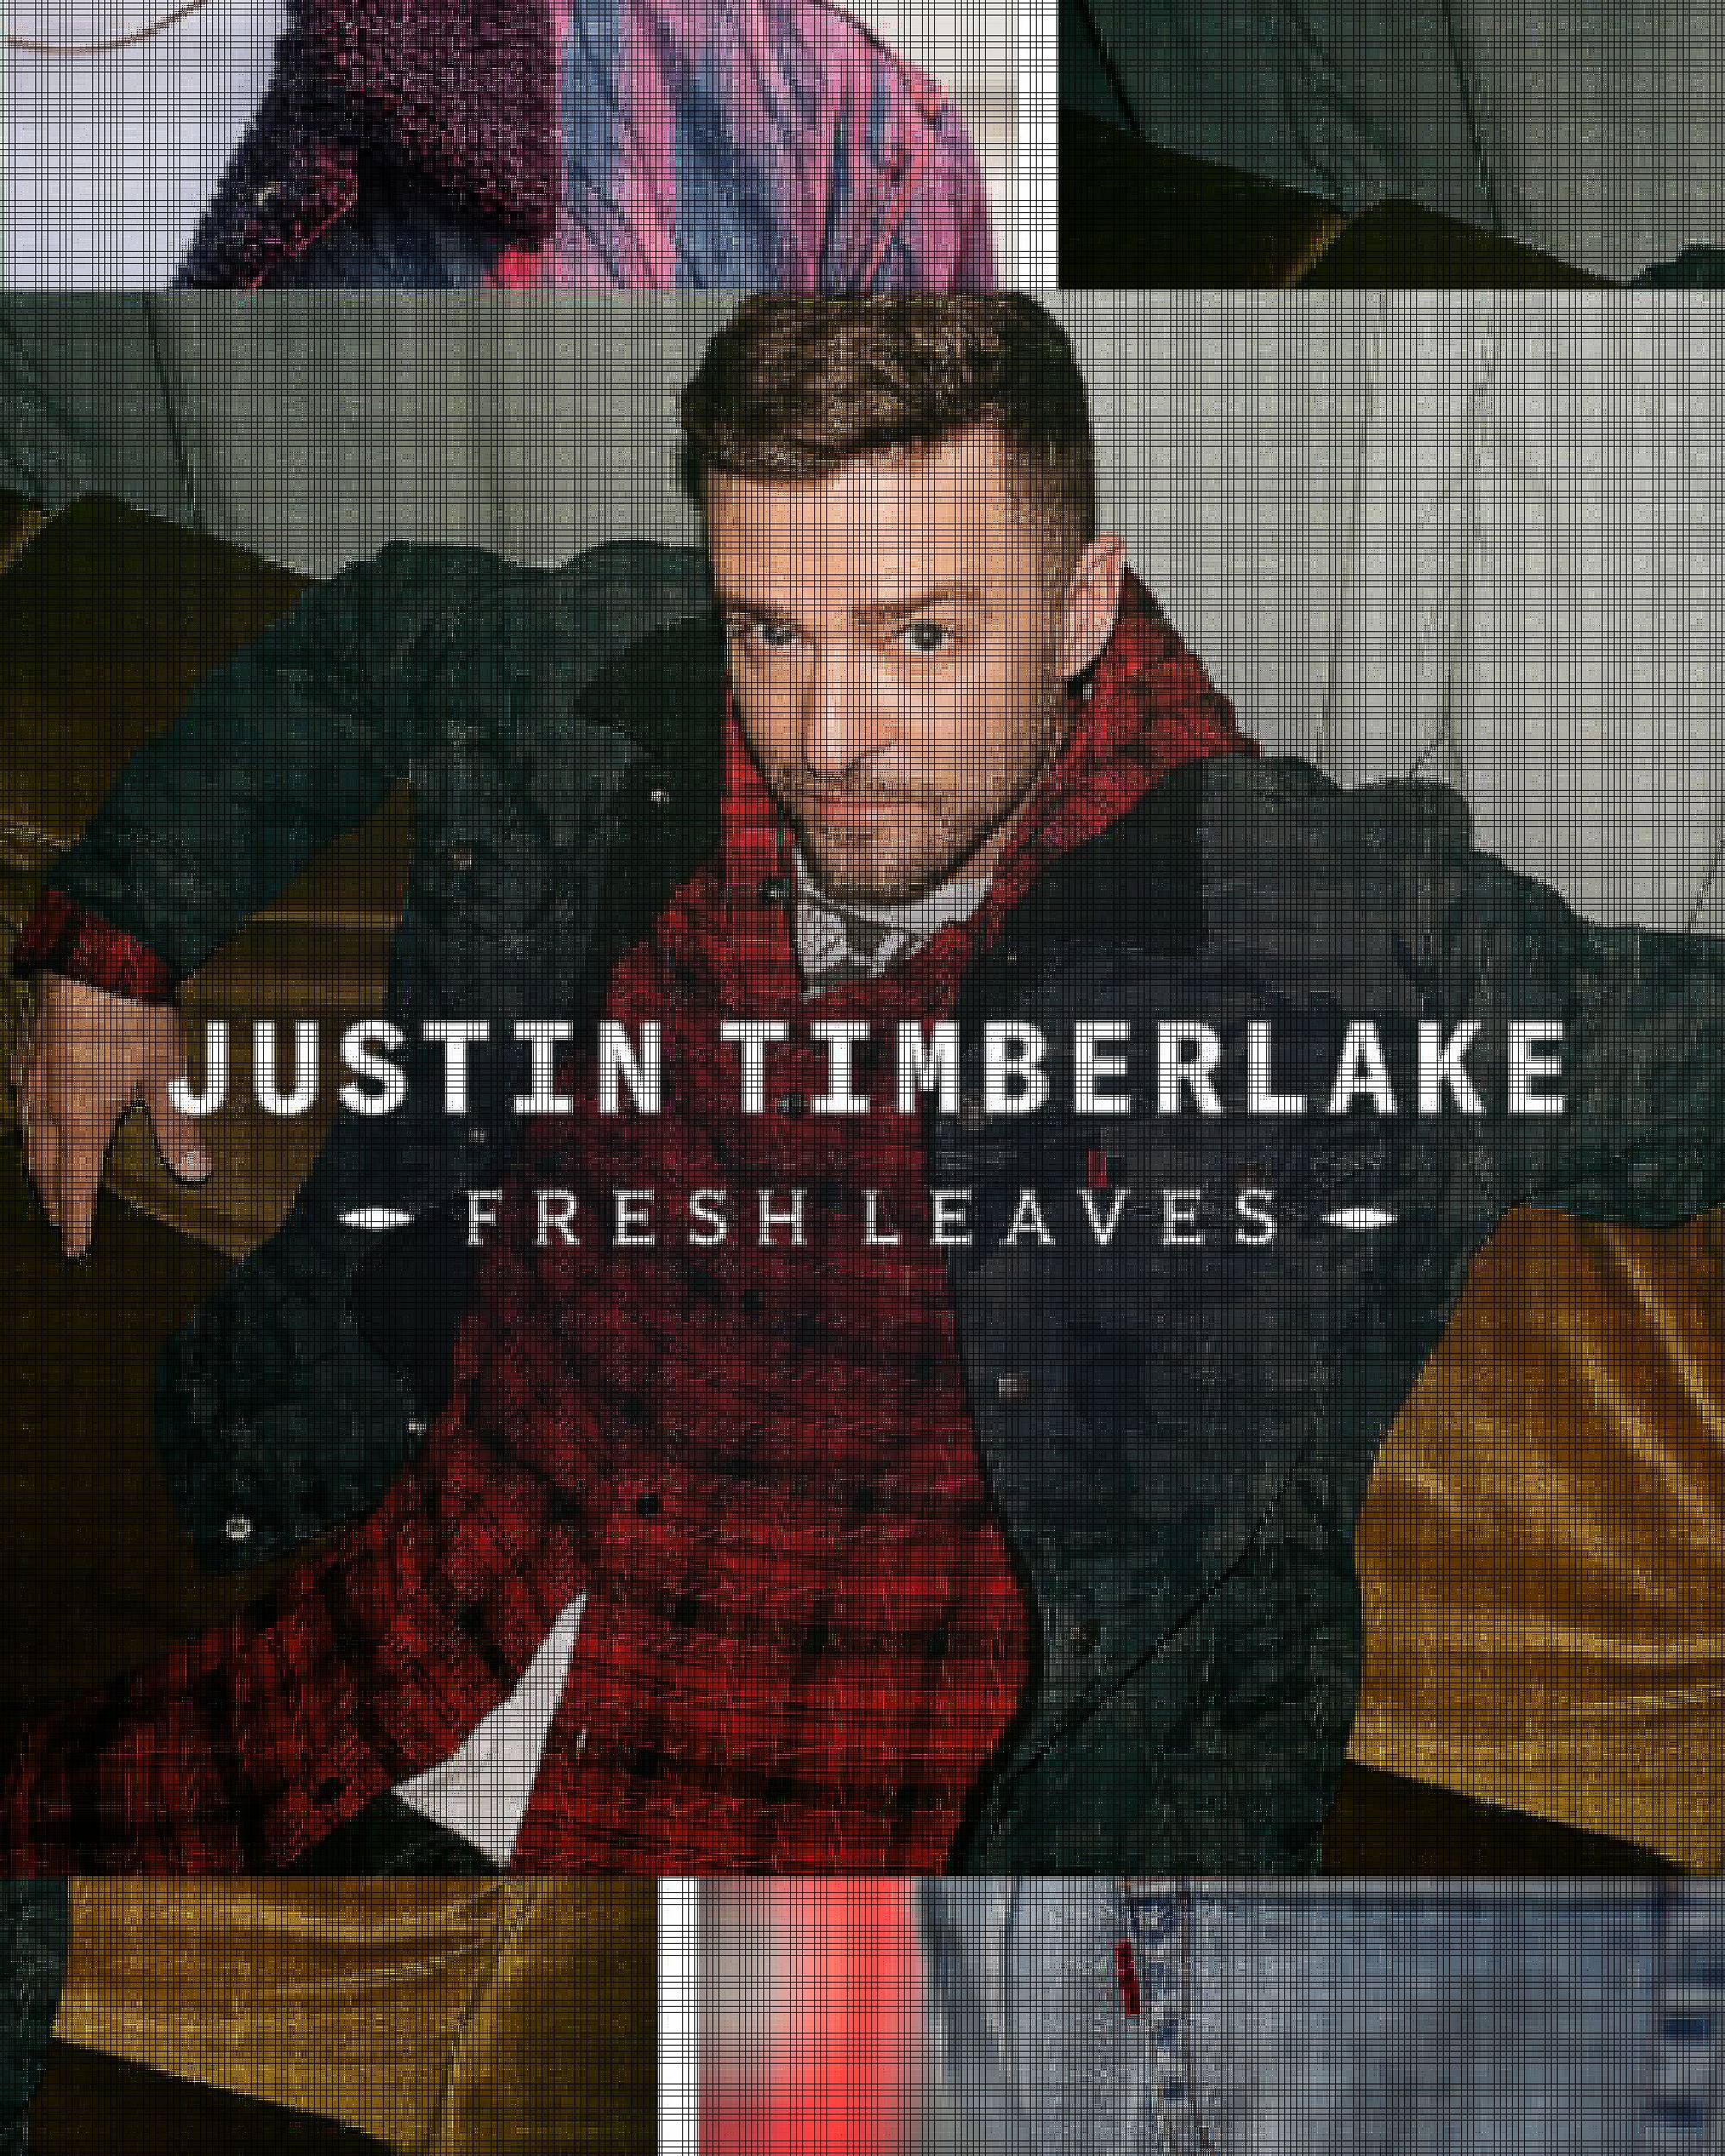 Justin Timberlake with clothing line